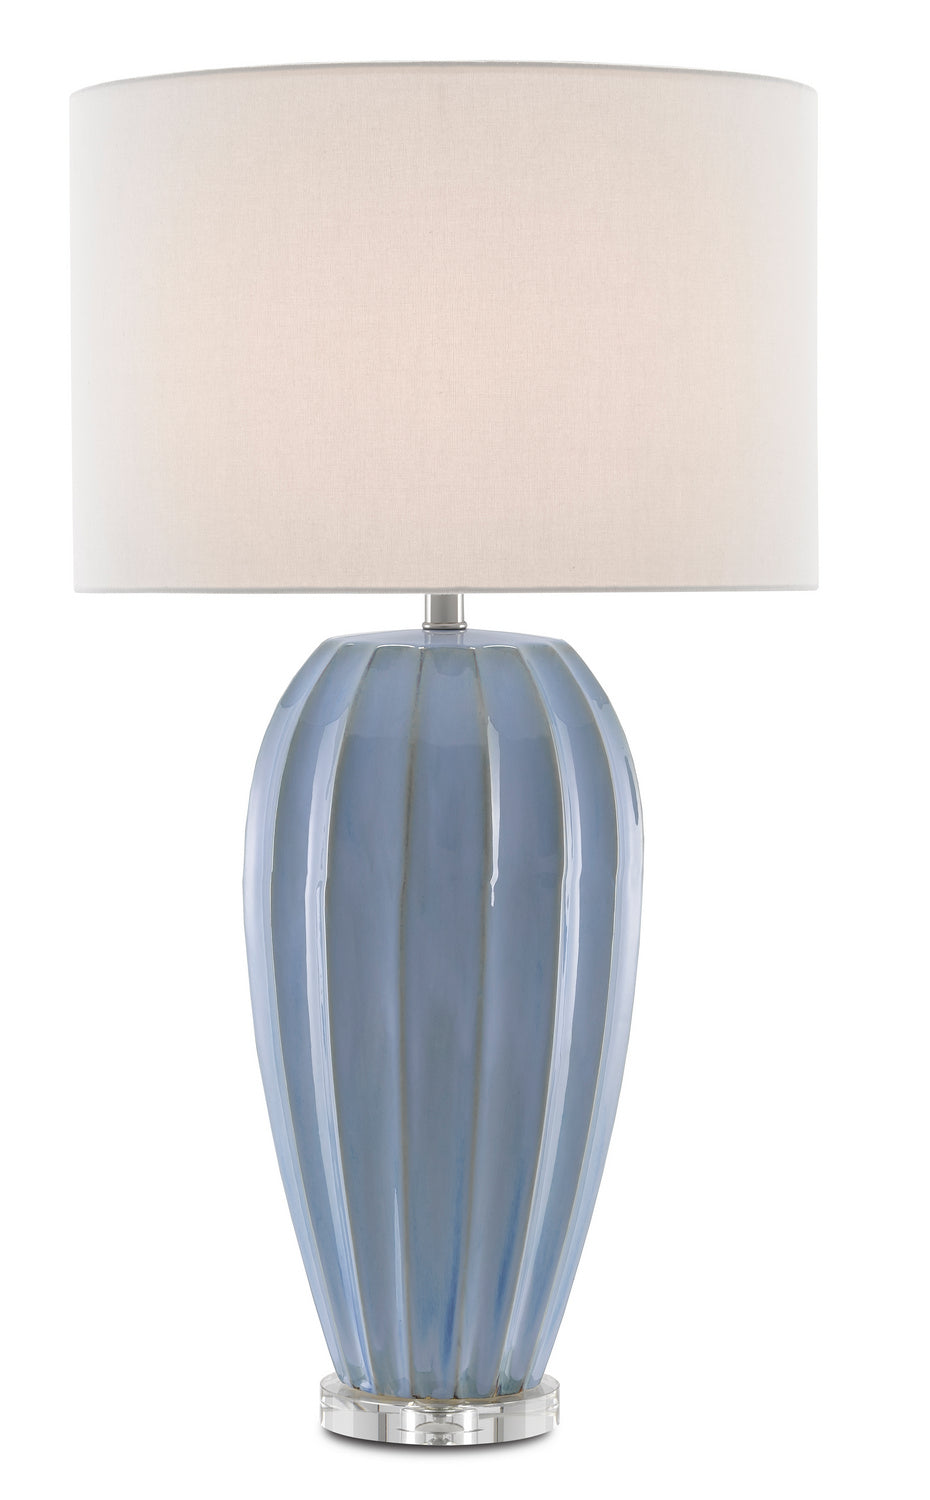 One Light Table Lamp from the Bluestar collection in Light Blue/Clear finish